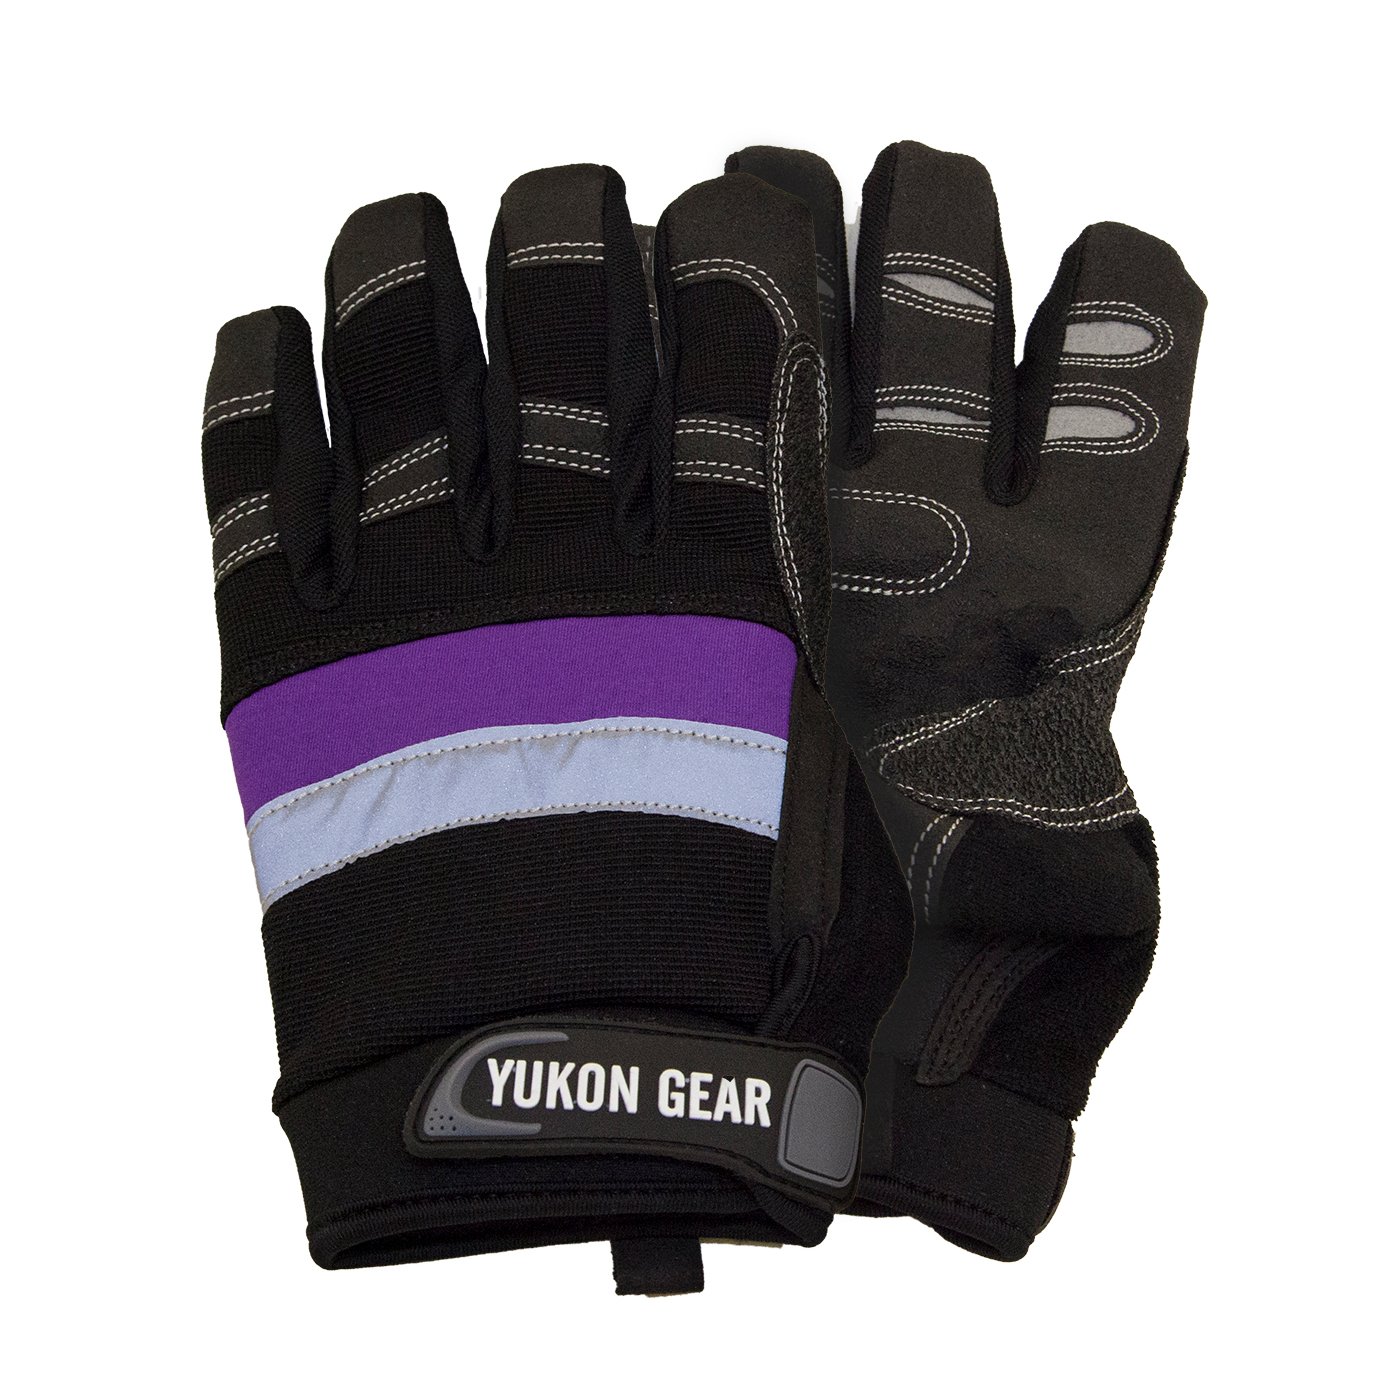 Recovery Gloves With Textured Rubber Palms And Fingers And Nylon Upper